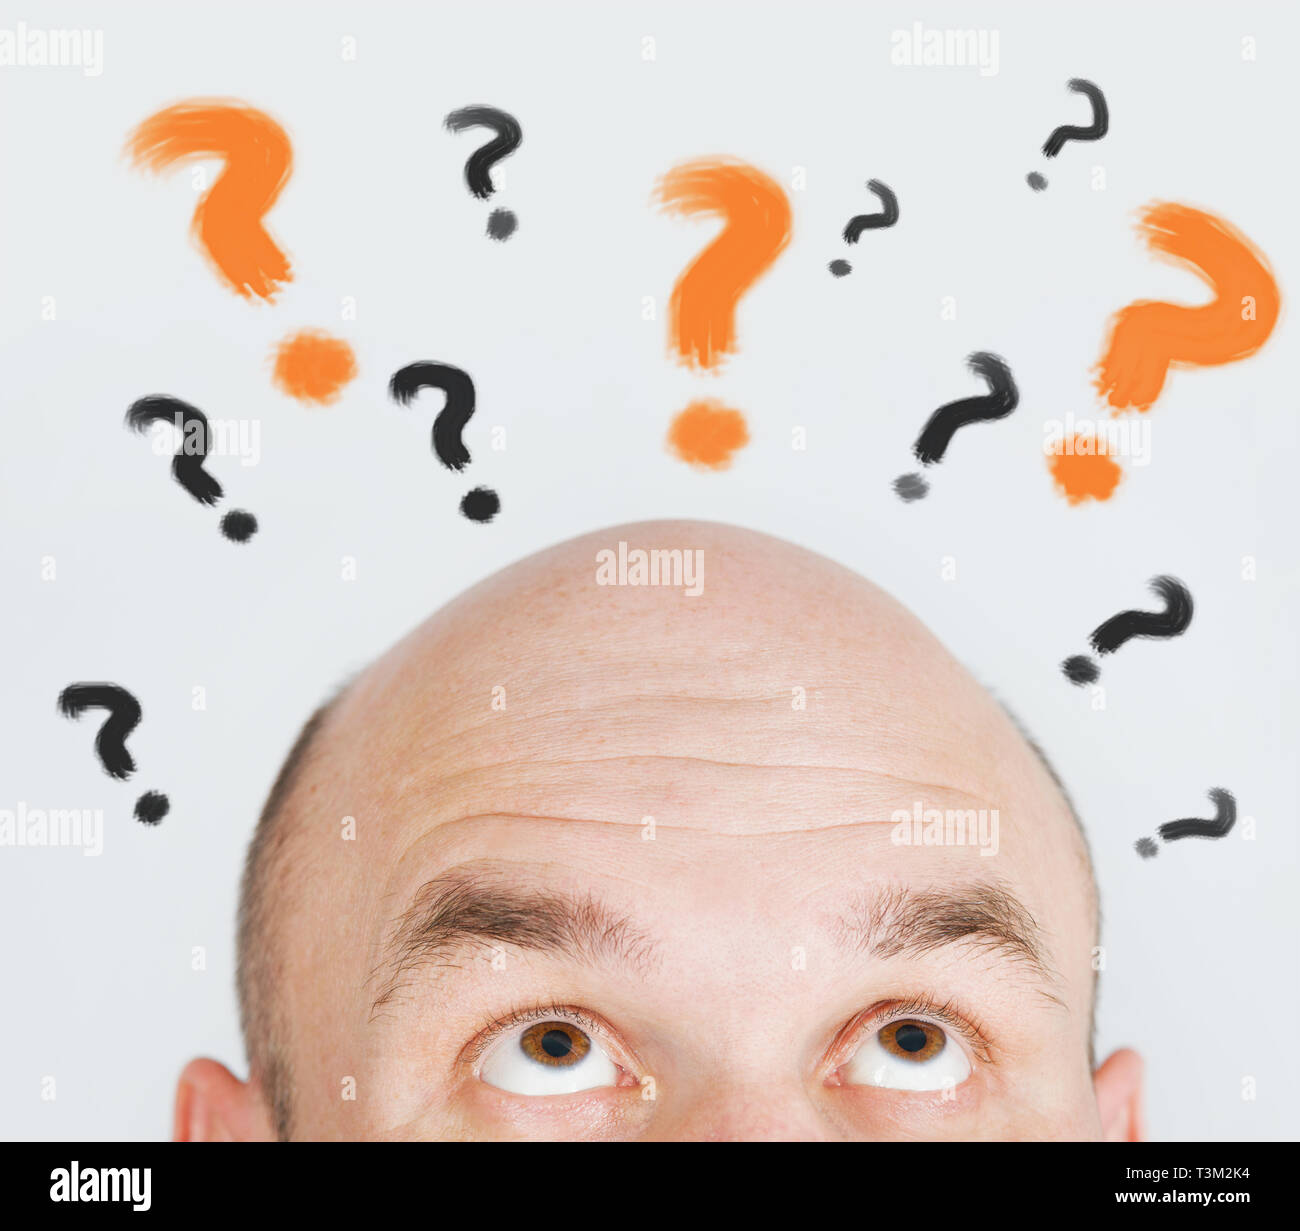 man thinking with question marks Stock Photo